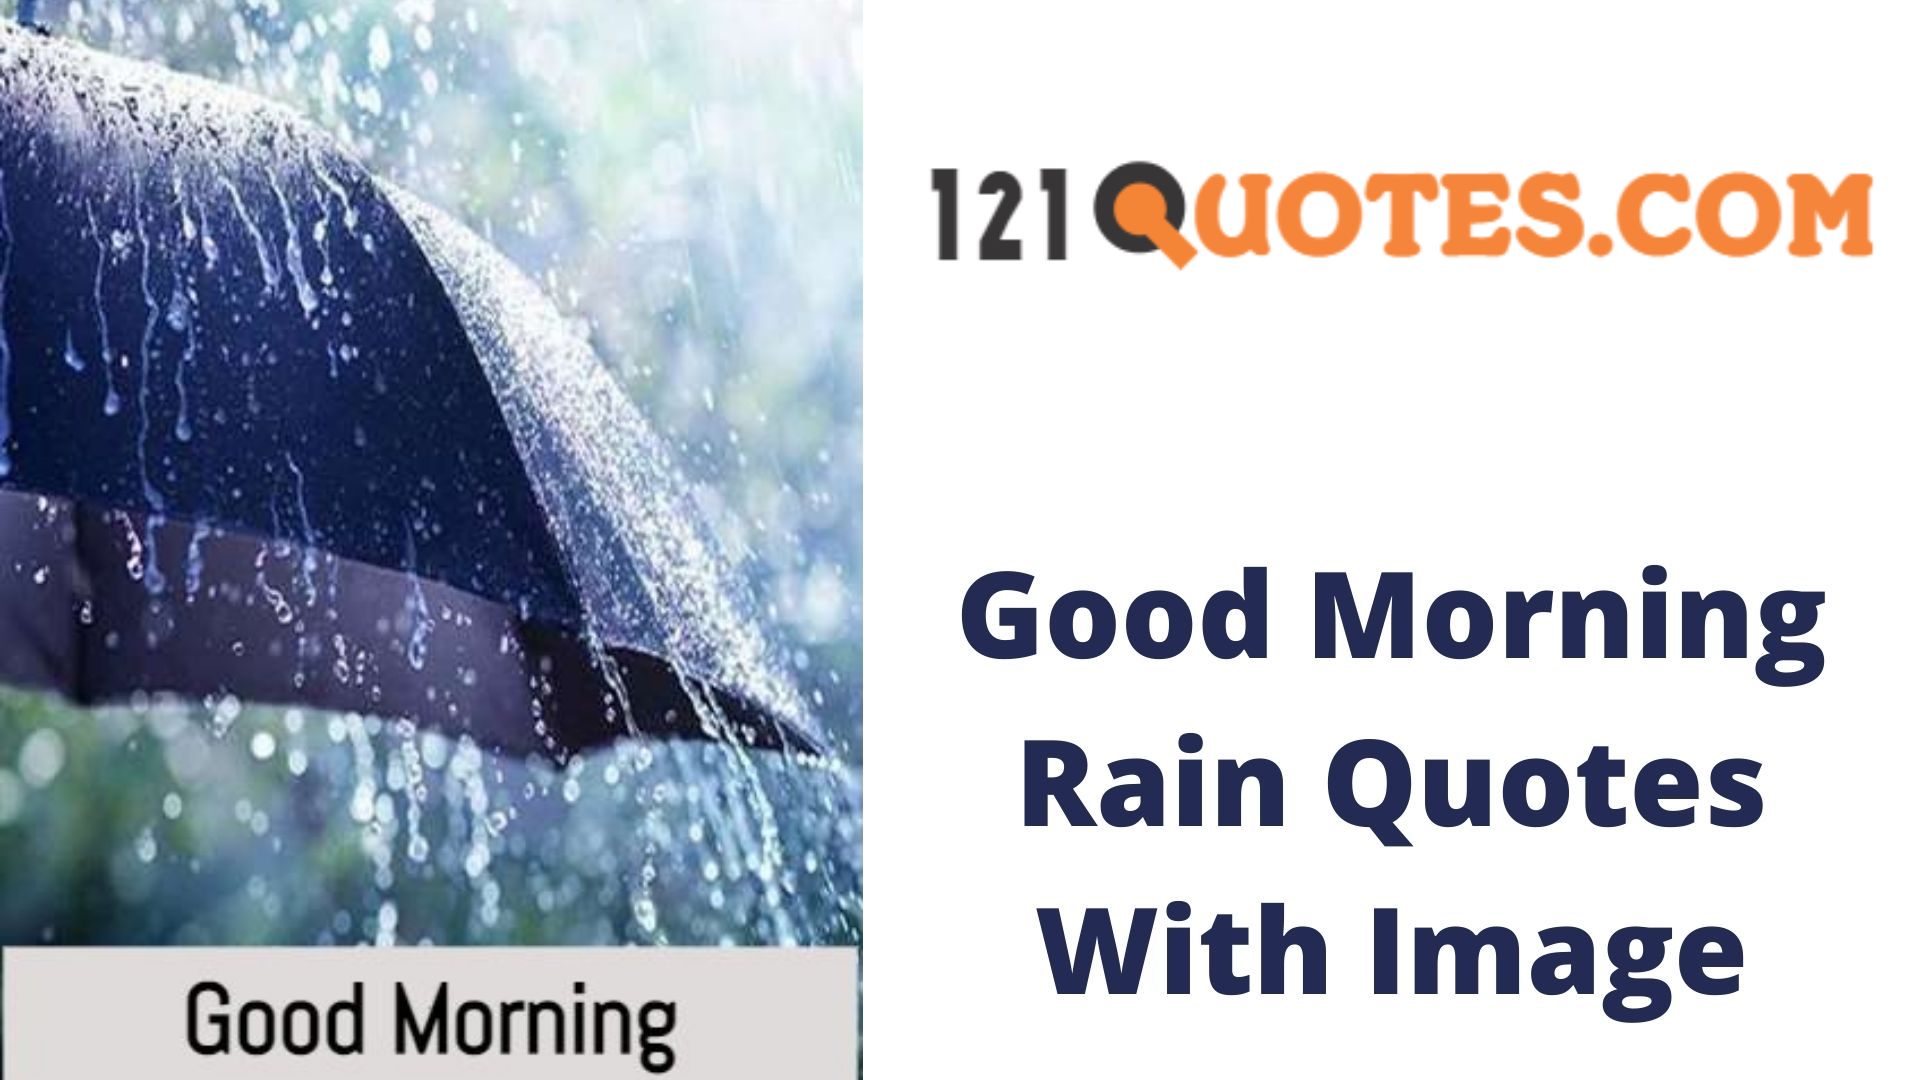 Good Morning Rain Quotes With Image, Rainy Day Photos For Whatsapp